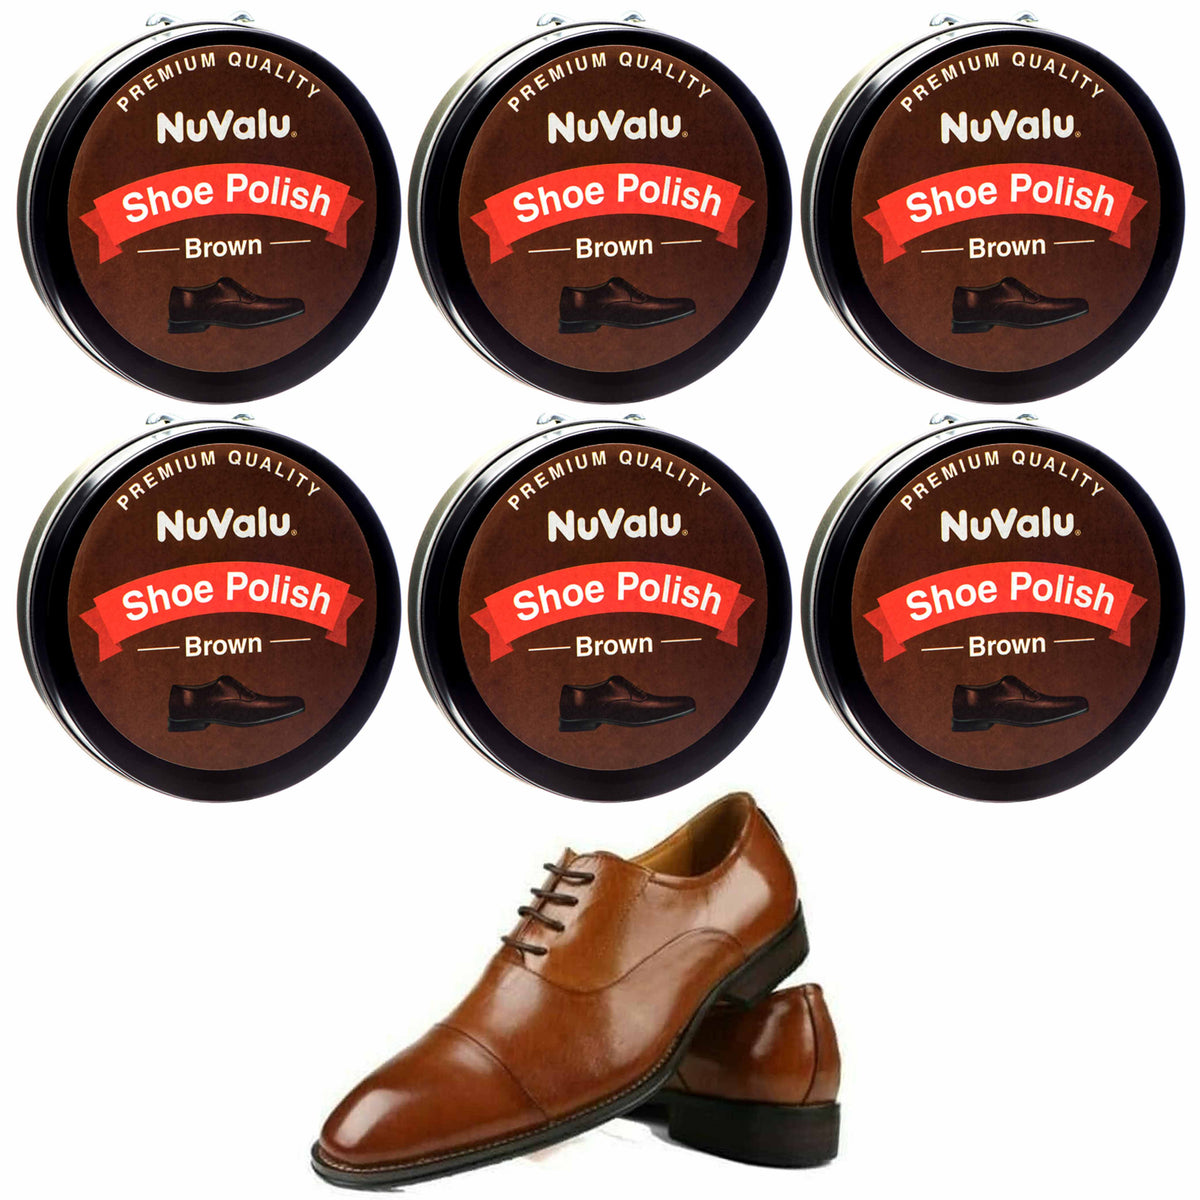 AllTopBargains 4 PC Shoe Polish Shine Sponge Cleaning Protector Leather Care Boots All Colors